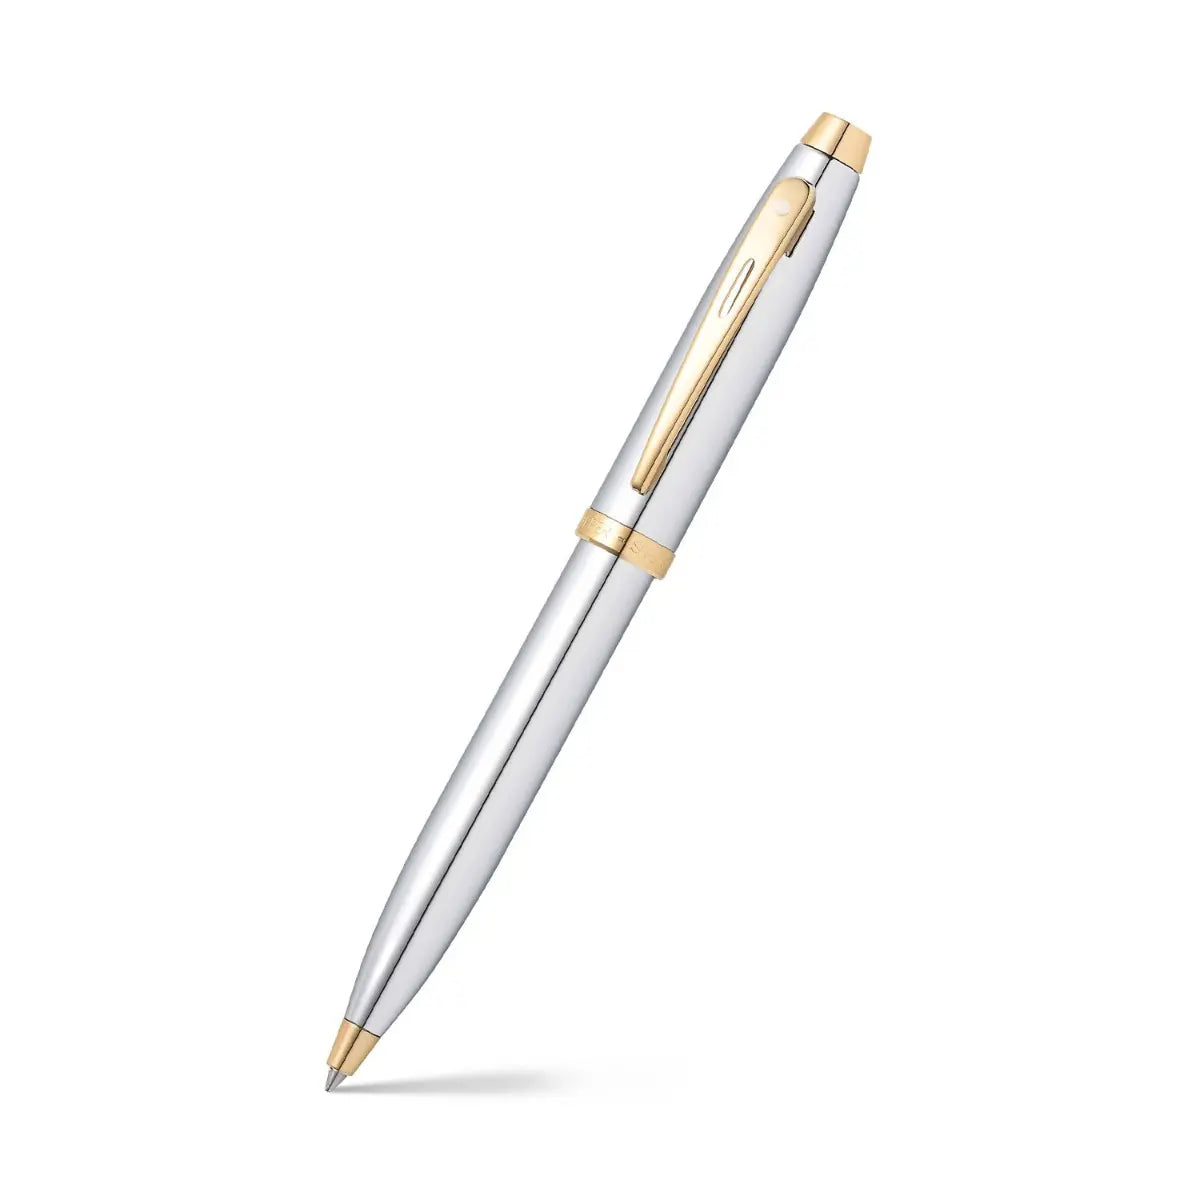 Sheaffer® Gift Set ft. Bright Chrome S100 9340 Ballpoint Pen with Gold Tone Trim and Medium Notebook